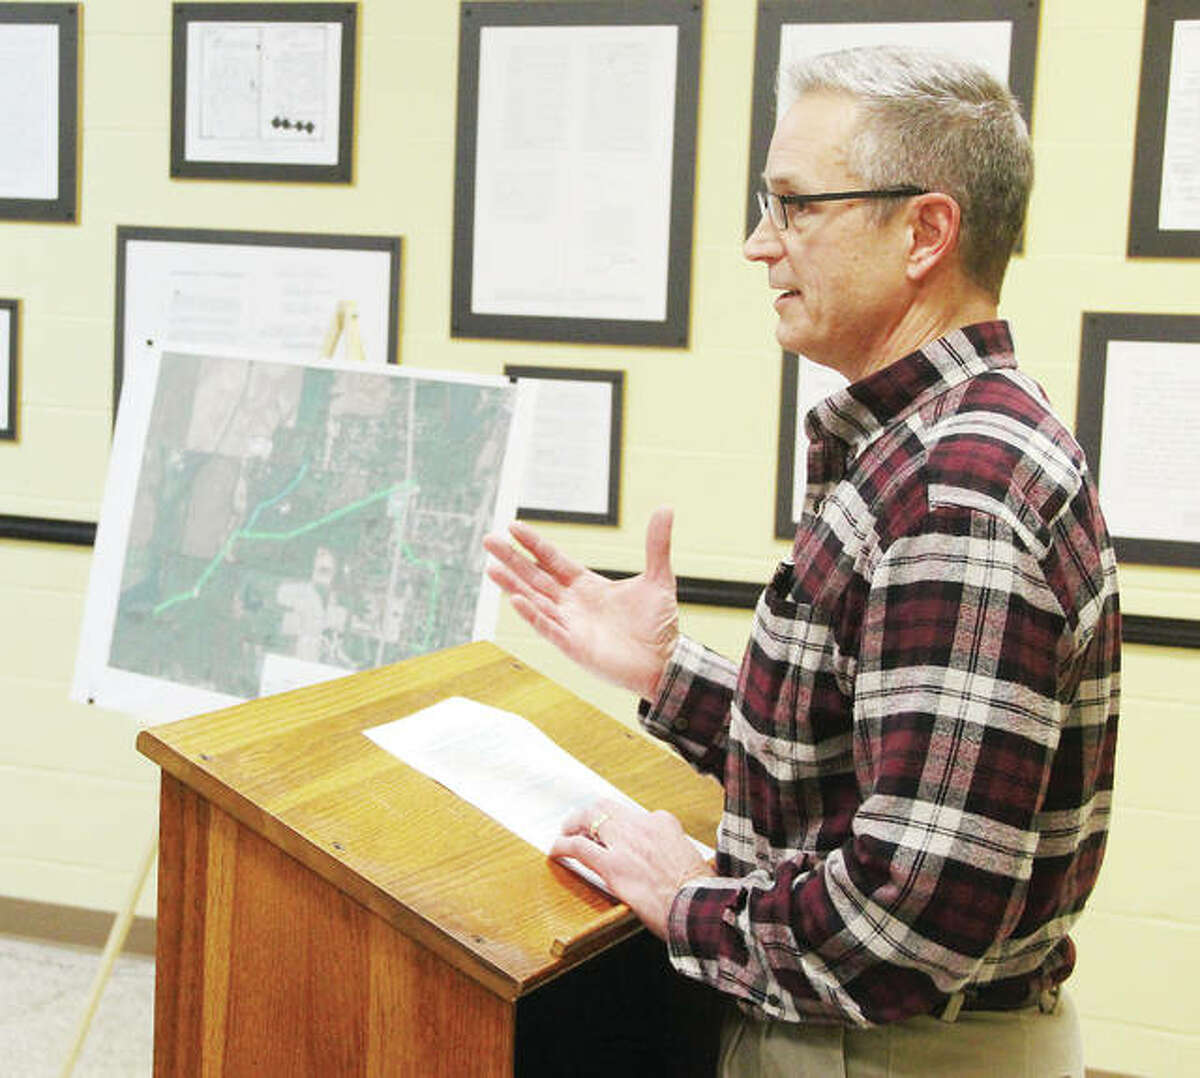 Curtis A. Westrich, an engineer with Heneghan and Associates, talks about the Northeast Interceptor/Monticello Area Sanitary Sewer Improvement project during a public hearing on a proposed low-interest loan to pay for the project. The hearing was held Tuesday before the Godfrey Village Board meeting in Godfrey Village Hall. The village is seeking to borrow $3.5 million for the project.